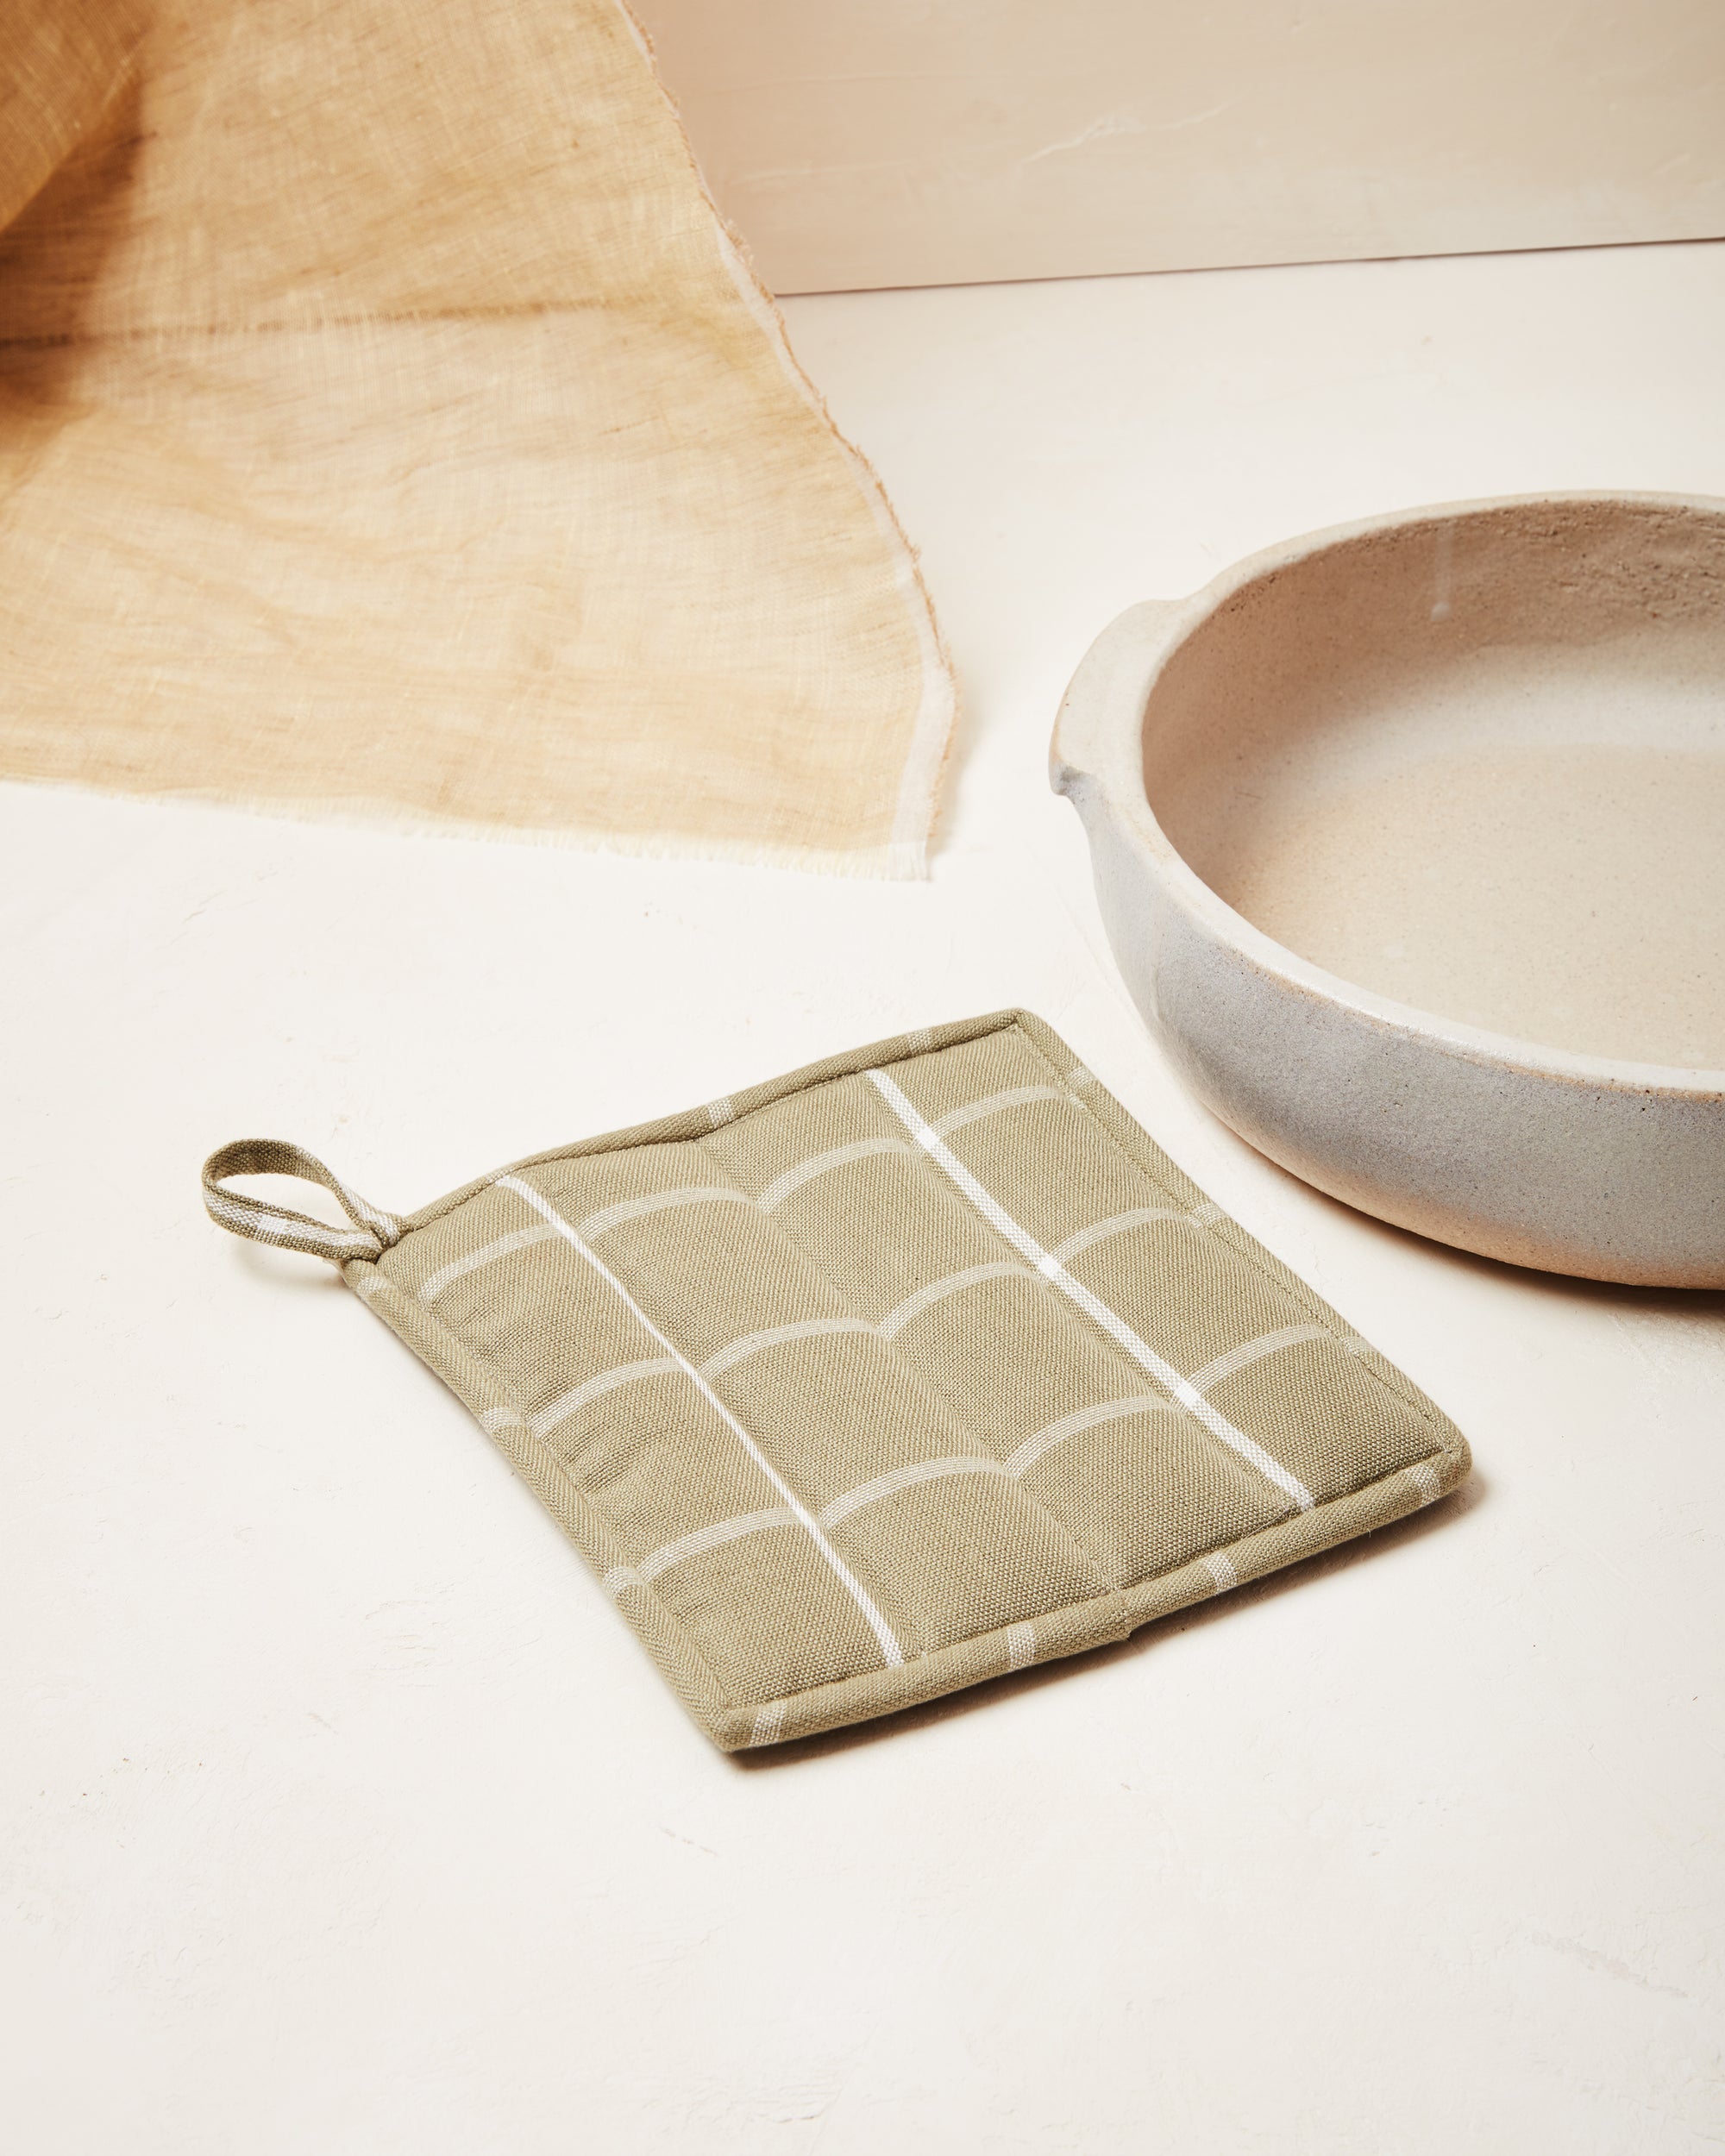 Ethically handwoven cotton potholder designed by MINNA in sage grid.